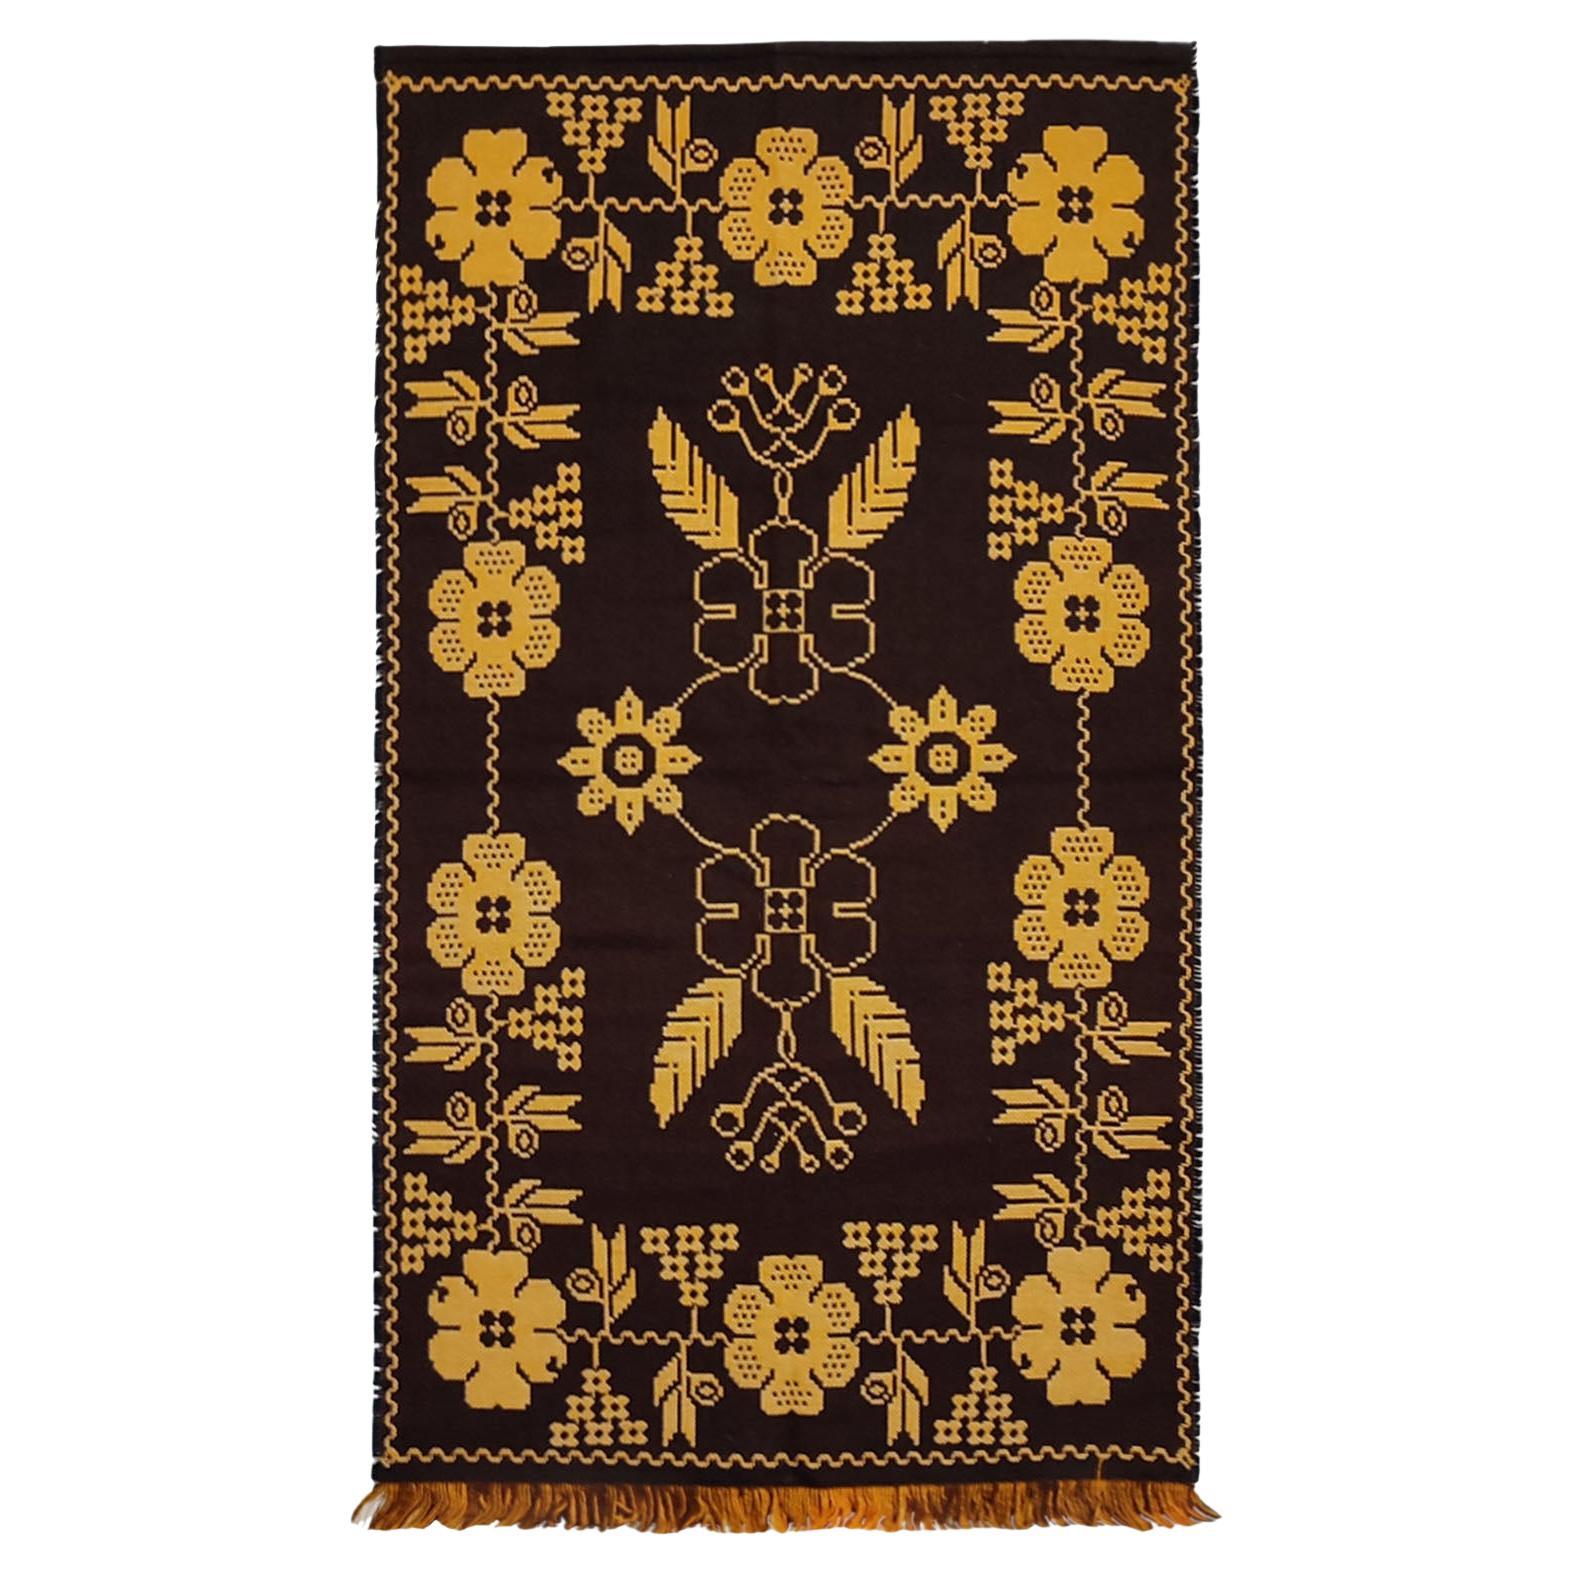 Mid-Century Double Weaved Wall Hanging Wool Tapestry, Finland, 1960s